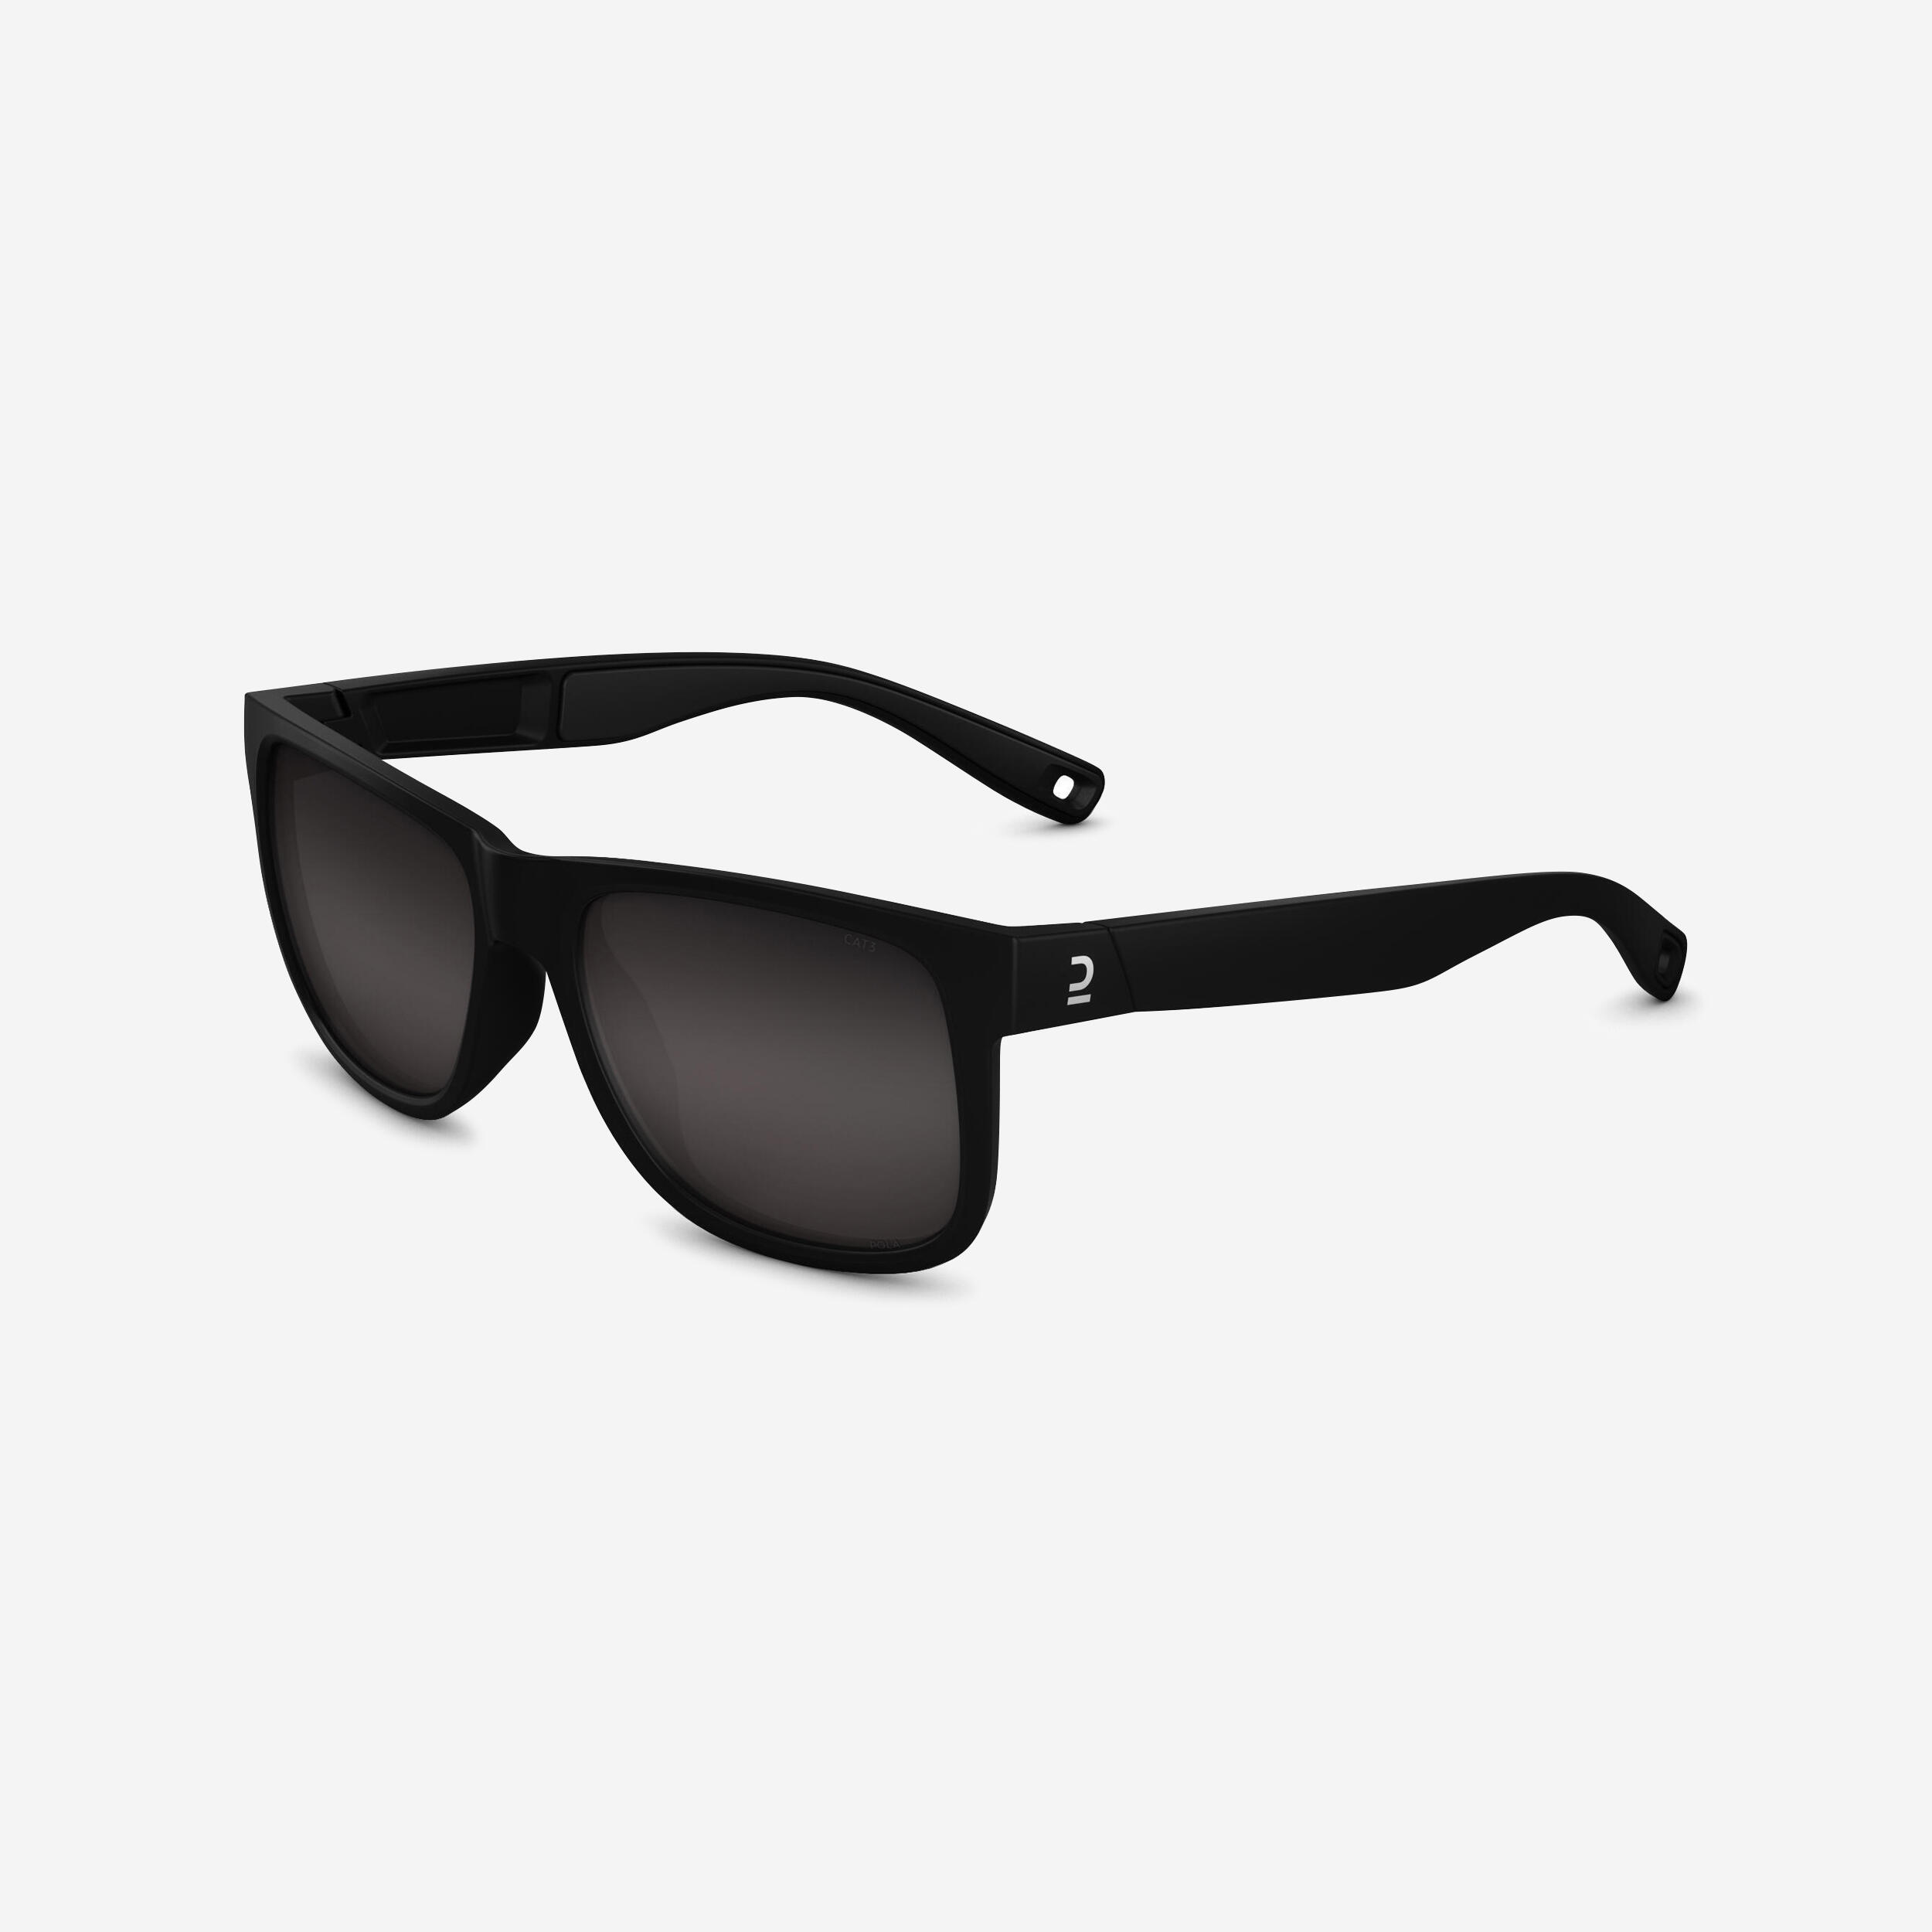 Adults Category 3 Hiking Sunglasses MH140 1/10